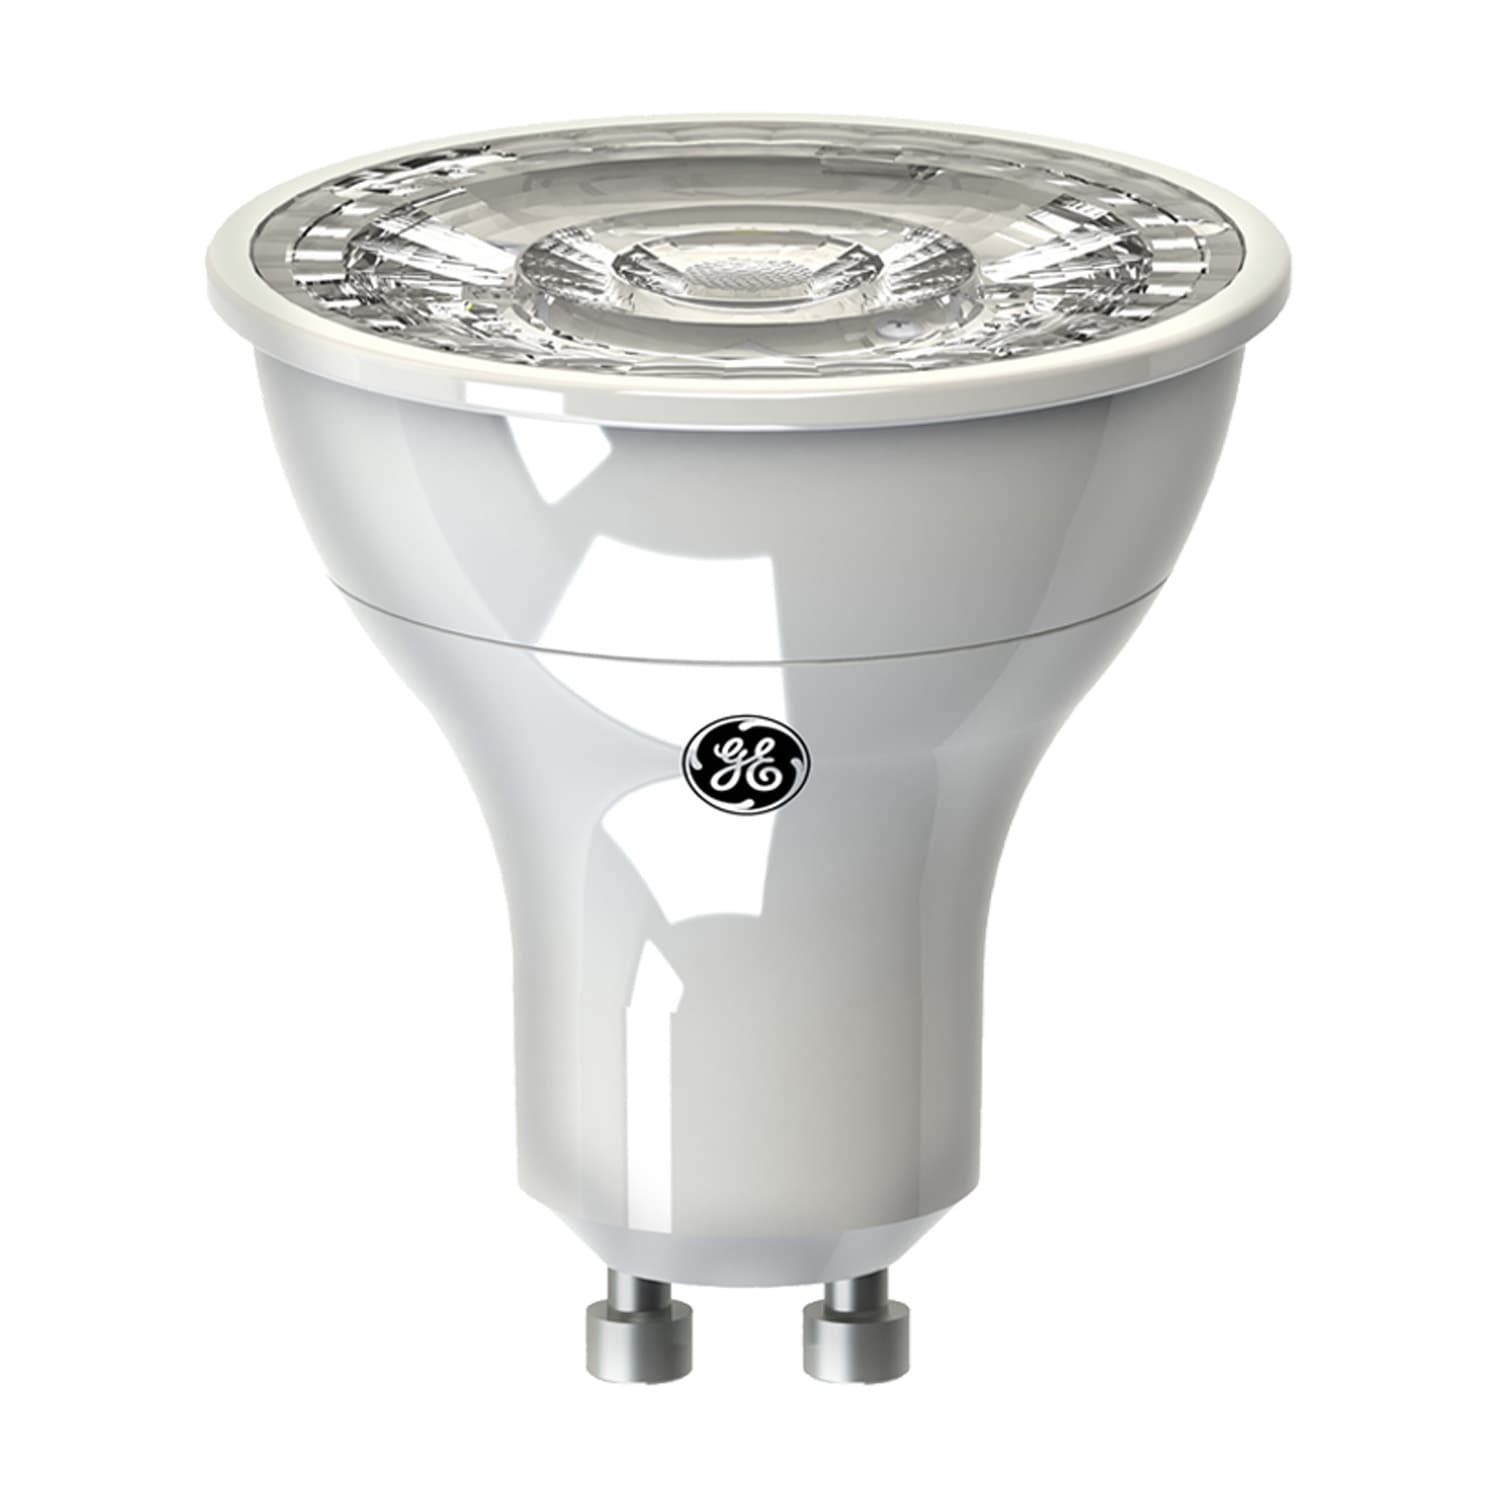 GE Basic EQ MR16 Soft White Gu10 Pin Base Dimmable LED Light Bulb in General Purpose LED Light Bulbs department at Lowes.com